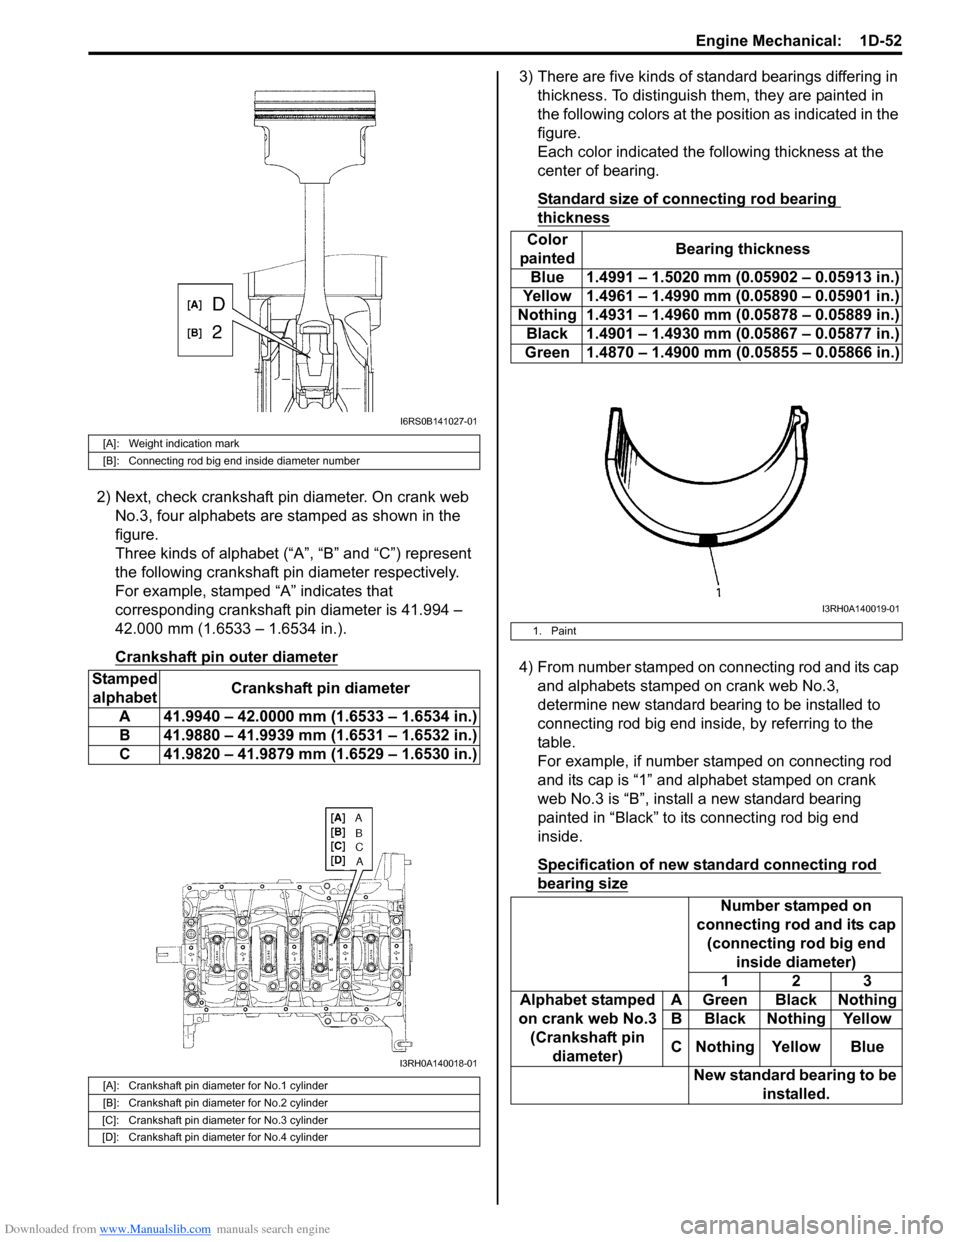 SUZUKI SWIFT 2008 2.G Service Repair Manual Downloaded from www.Manualslib.com manuals search engine Engine Mechanical:  1D-52
2) Next, check crankshaft pin diameter. On crank web No.3, four alphabets are stamped as shown in the 
figure.
Three 